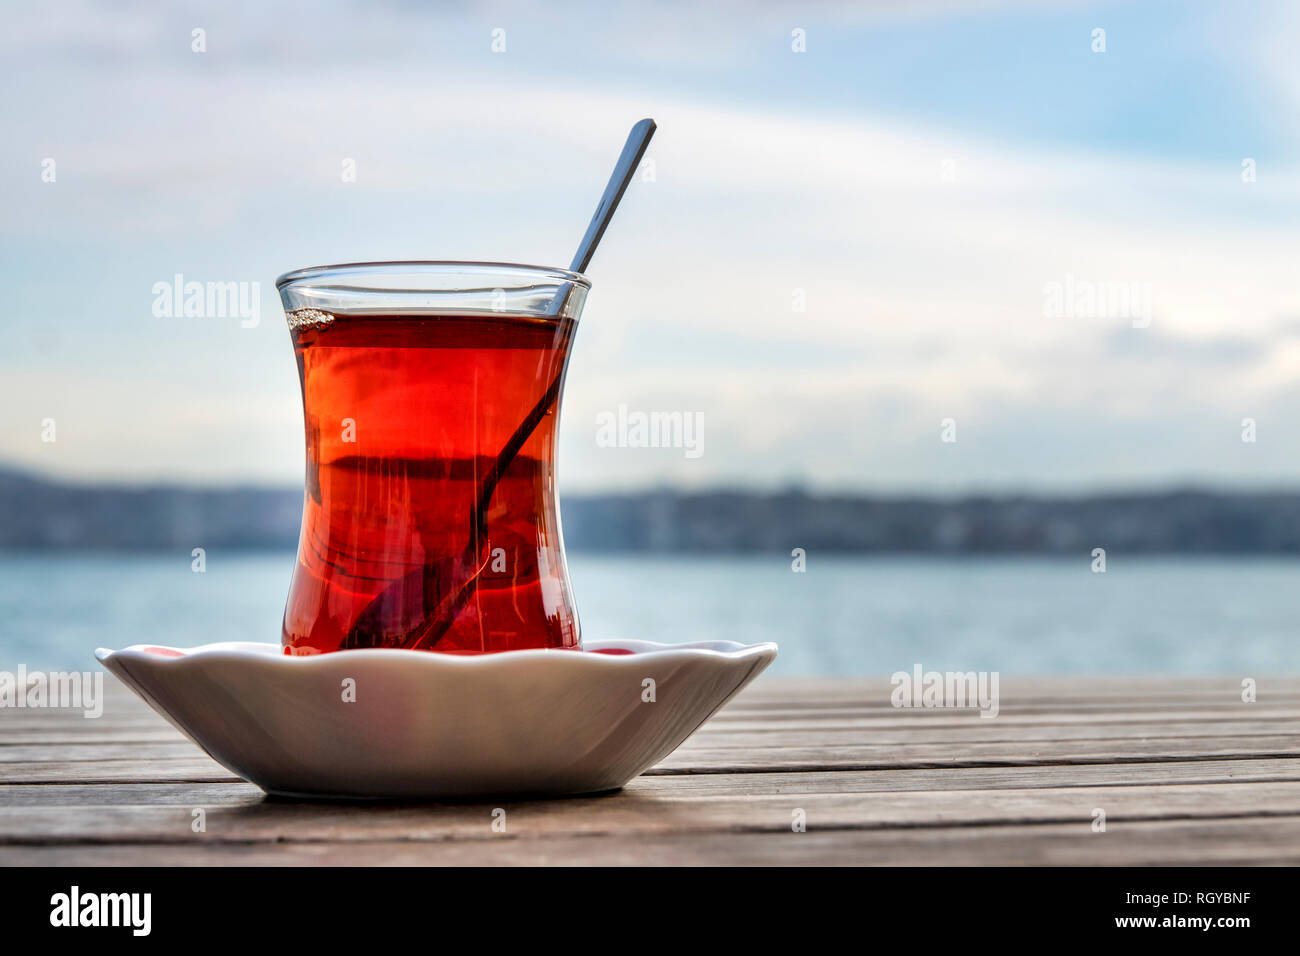 Turkish tea served in the typical manner, in a glass on a small saucer Stock Photo